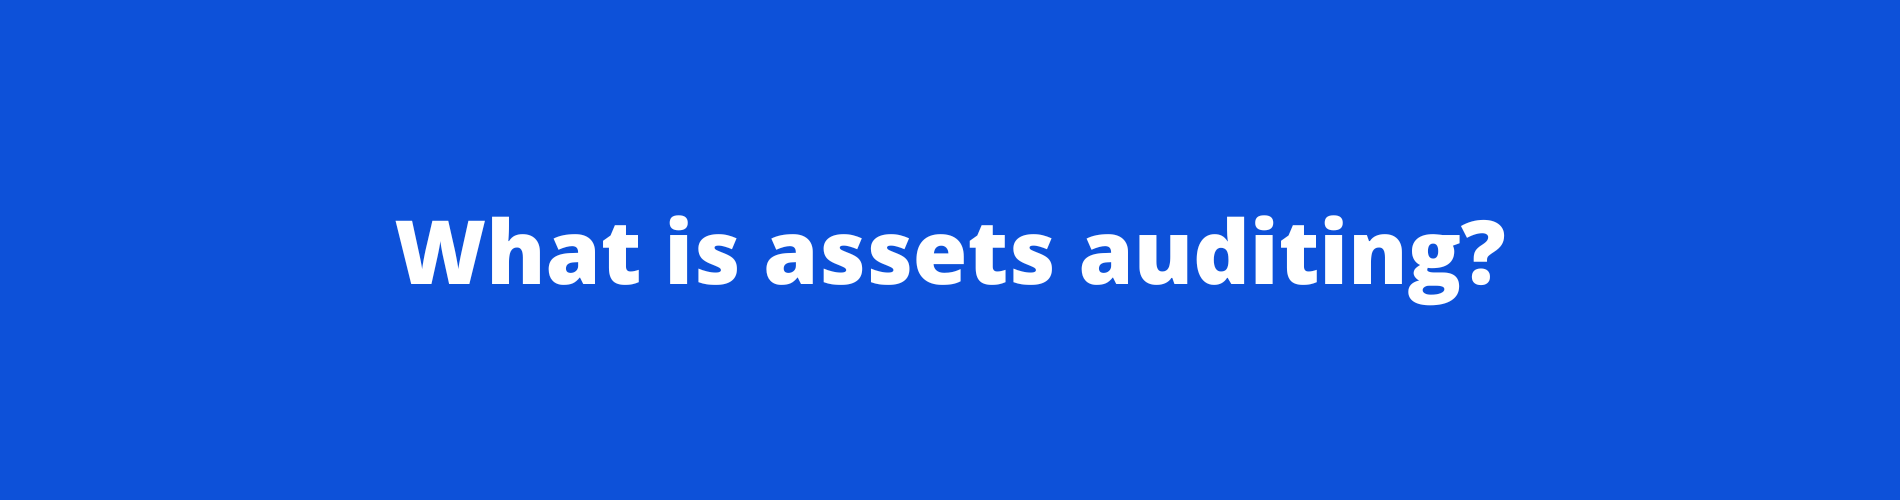 What is assets auditing